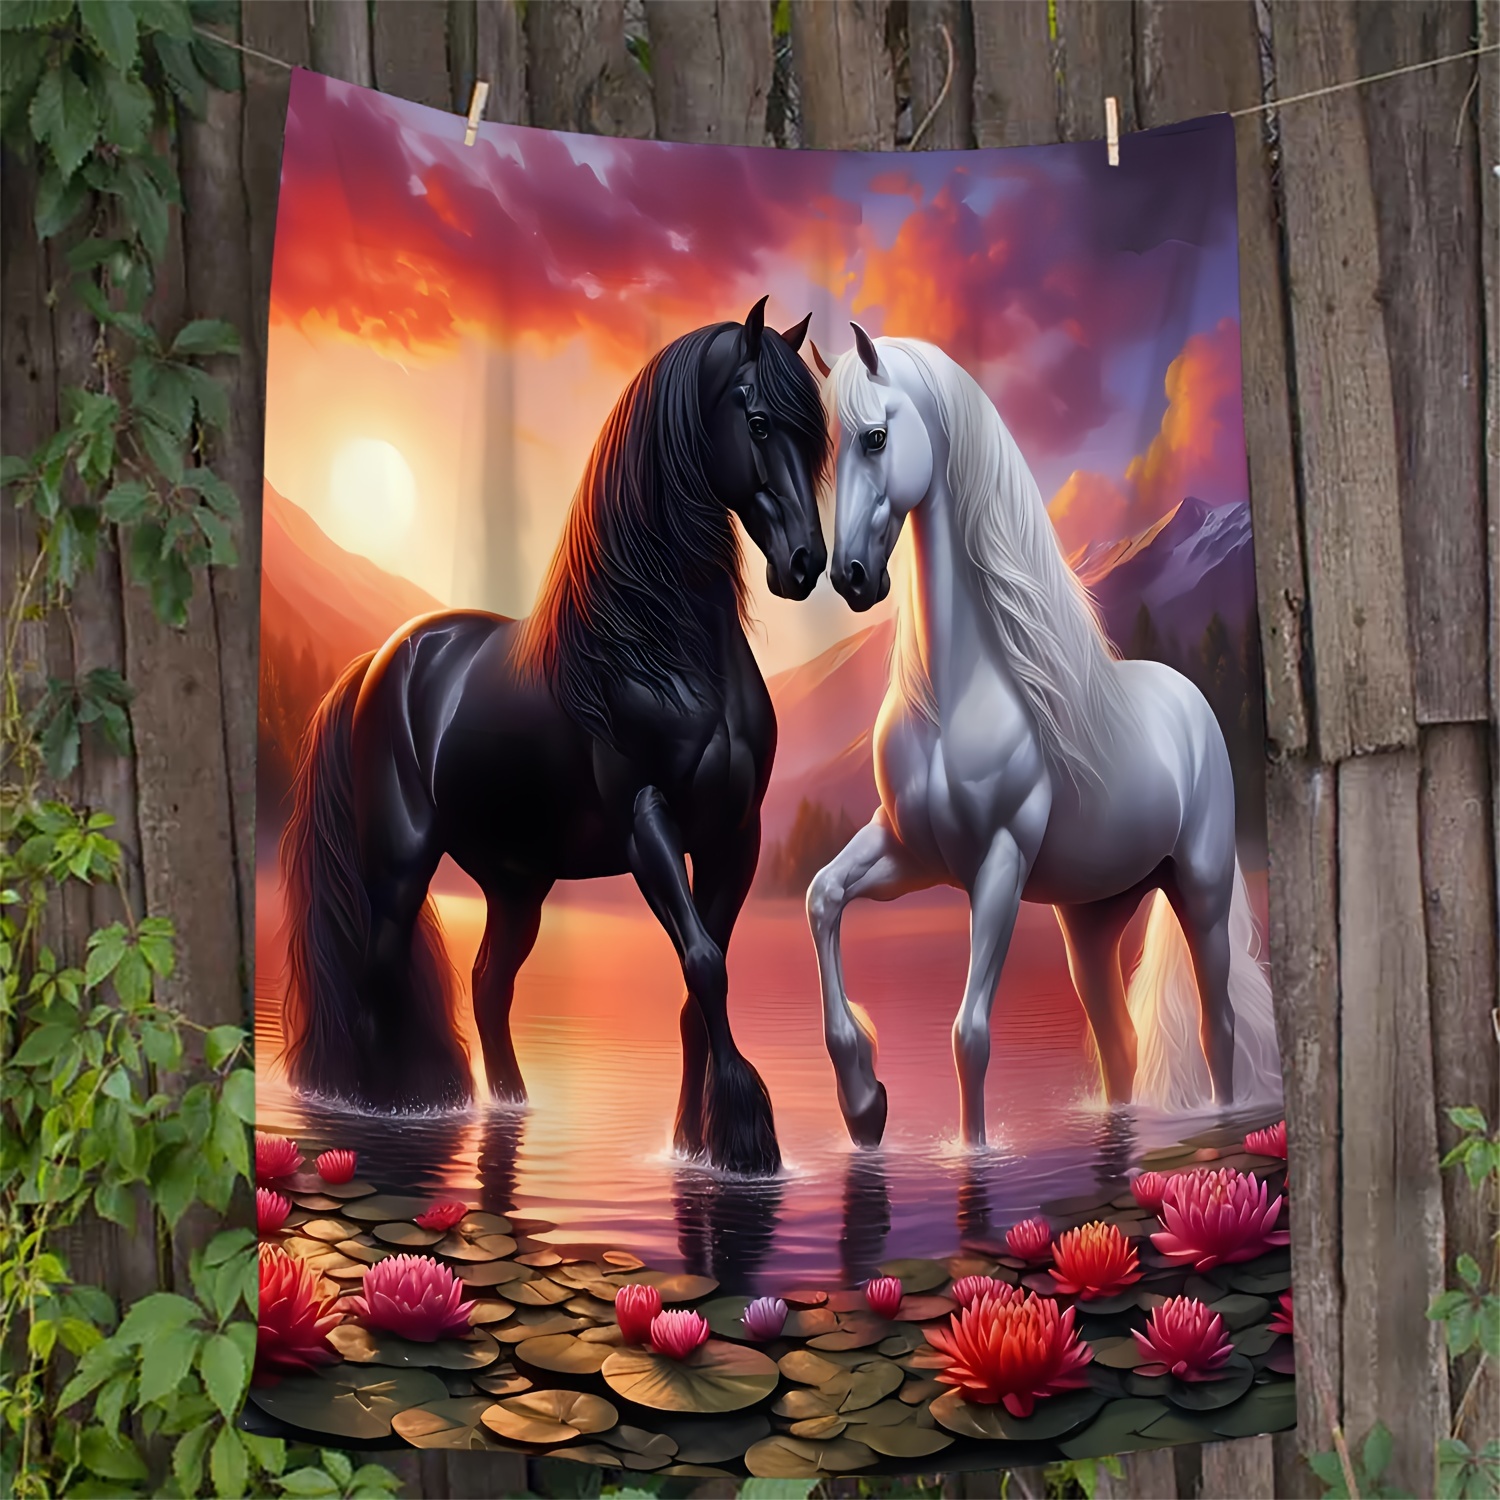 

Cozy Horse-themed Flannel Throw Blanket - Perfect Gift For Friends, Soft & Warm For All Seasons